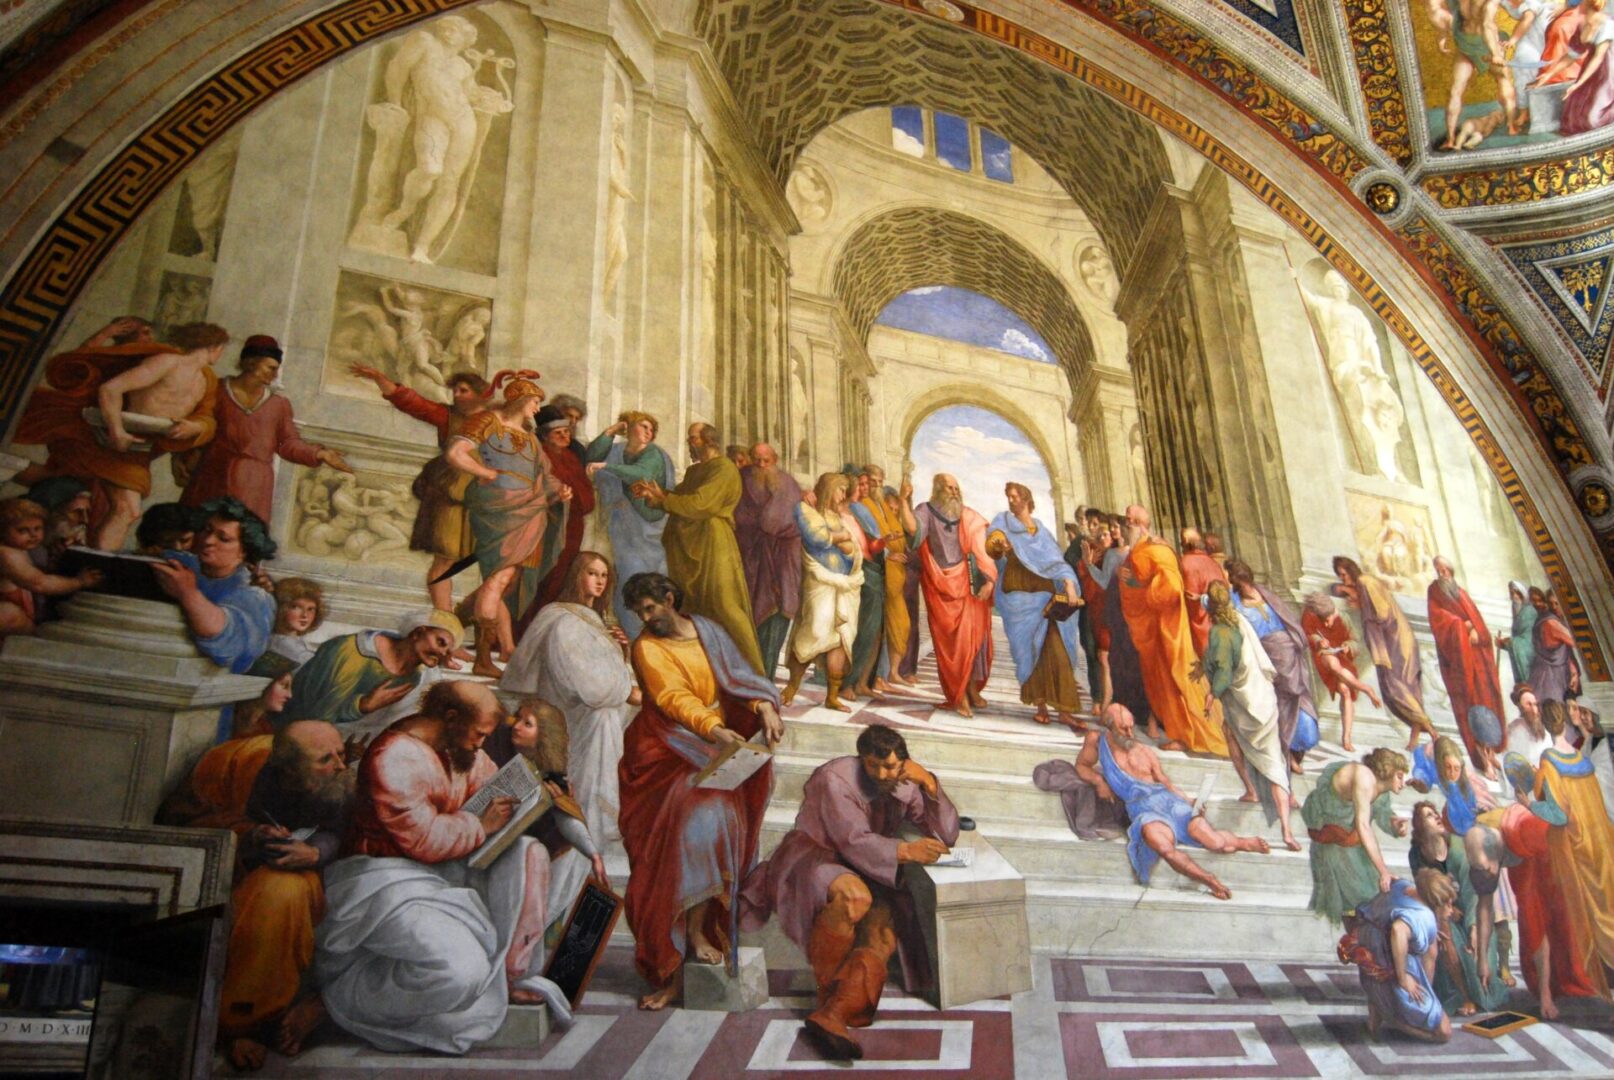 A painting of people in the vatican.